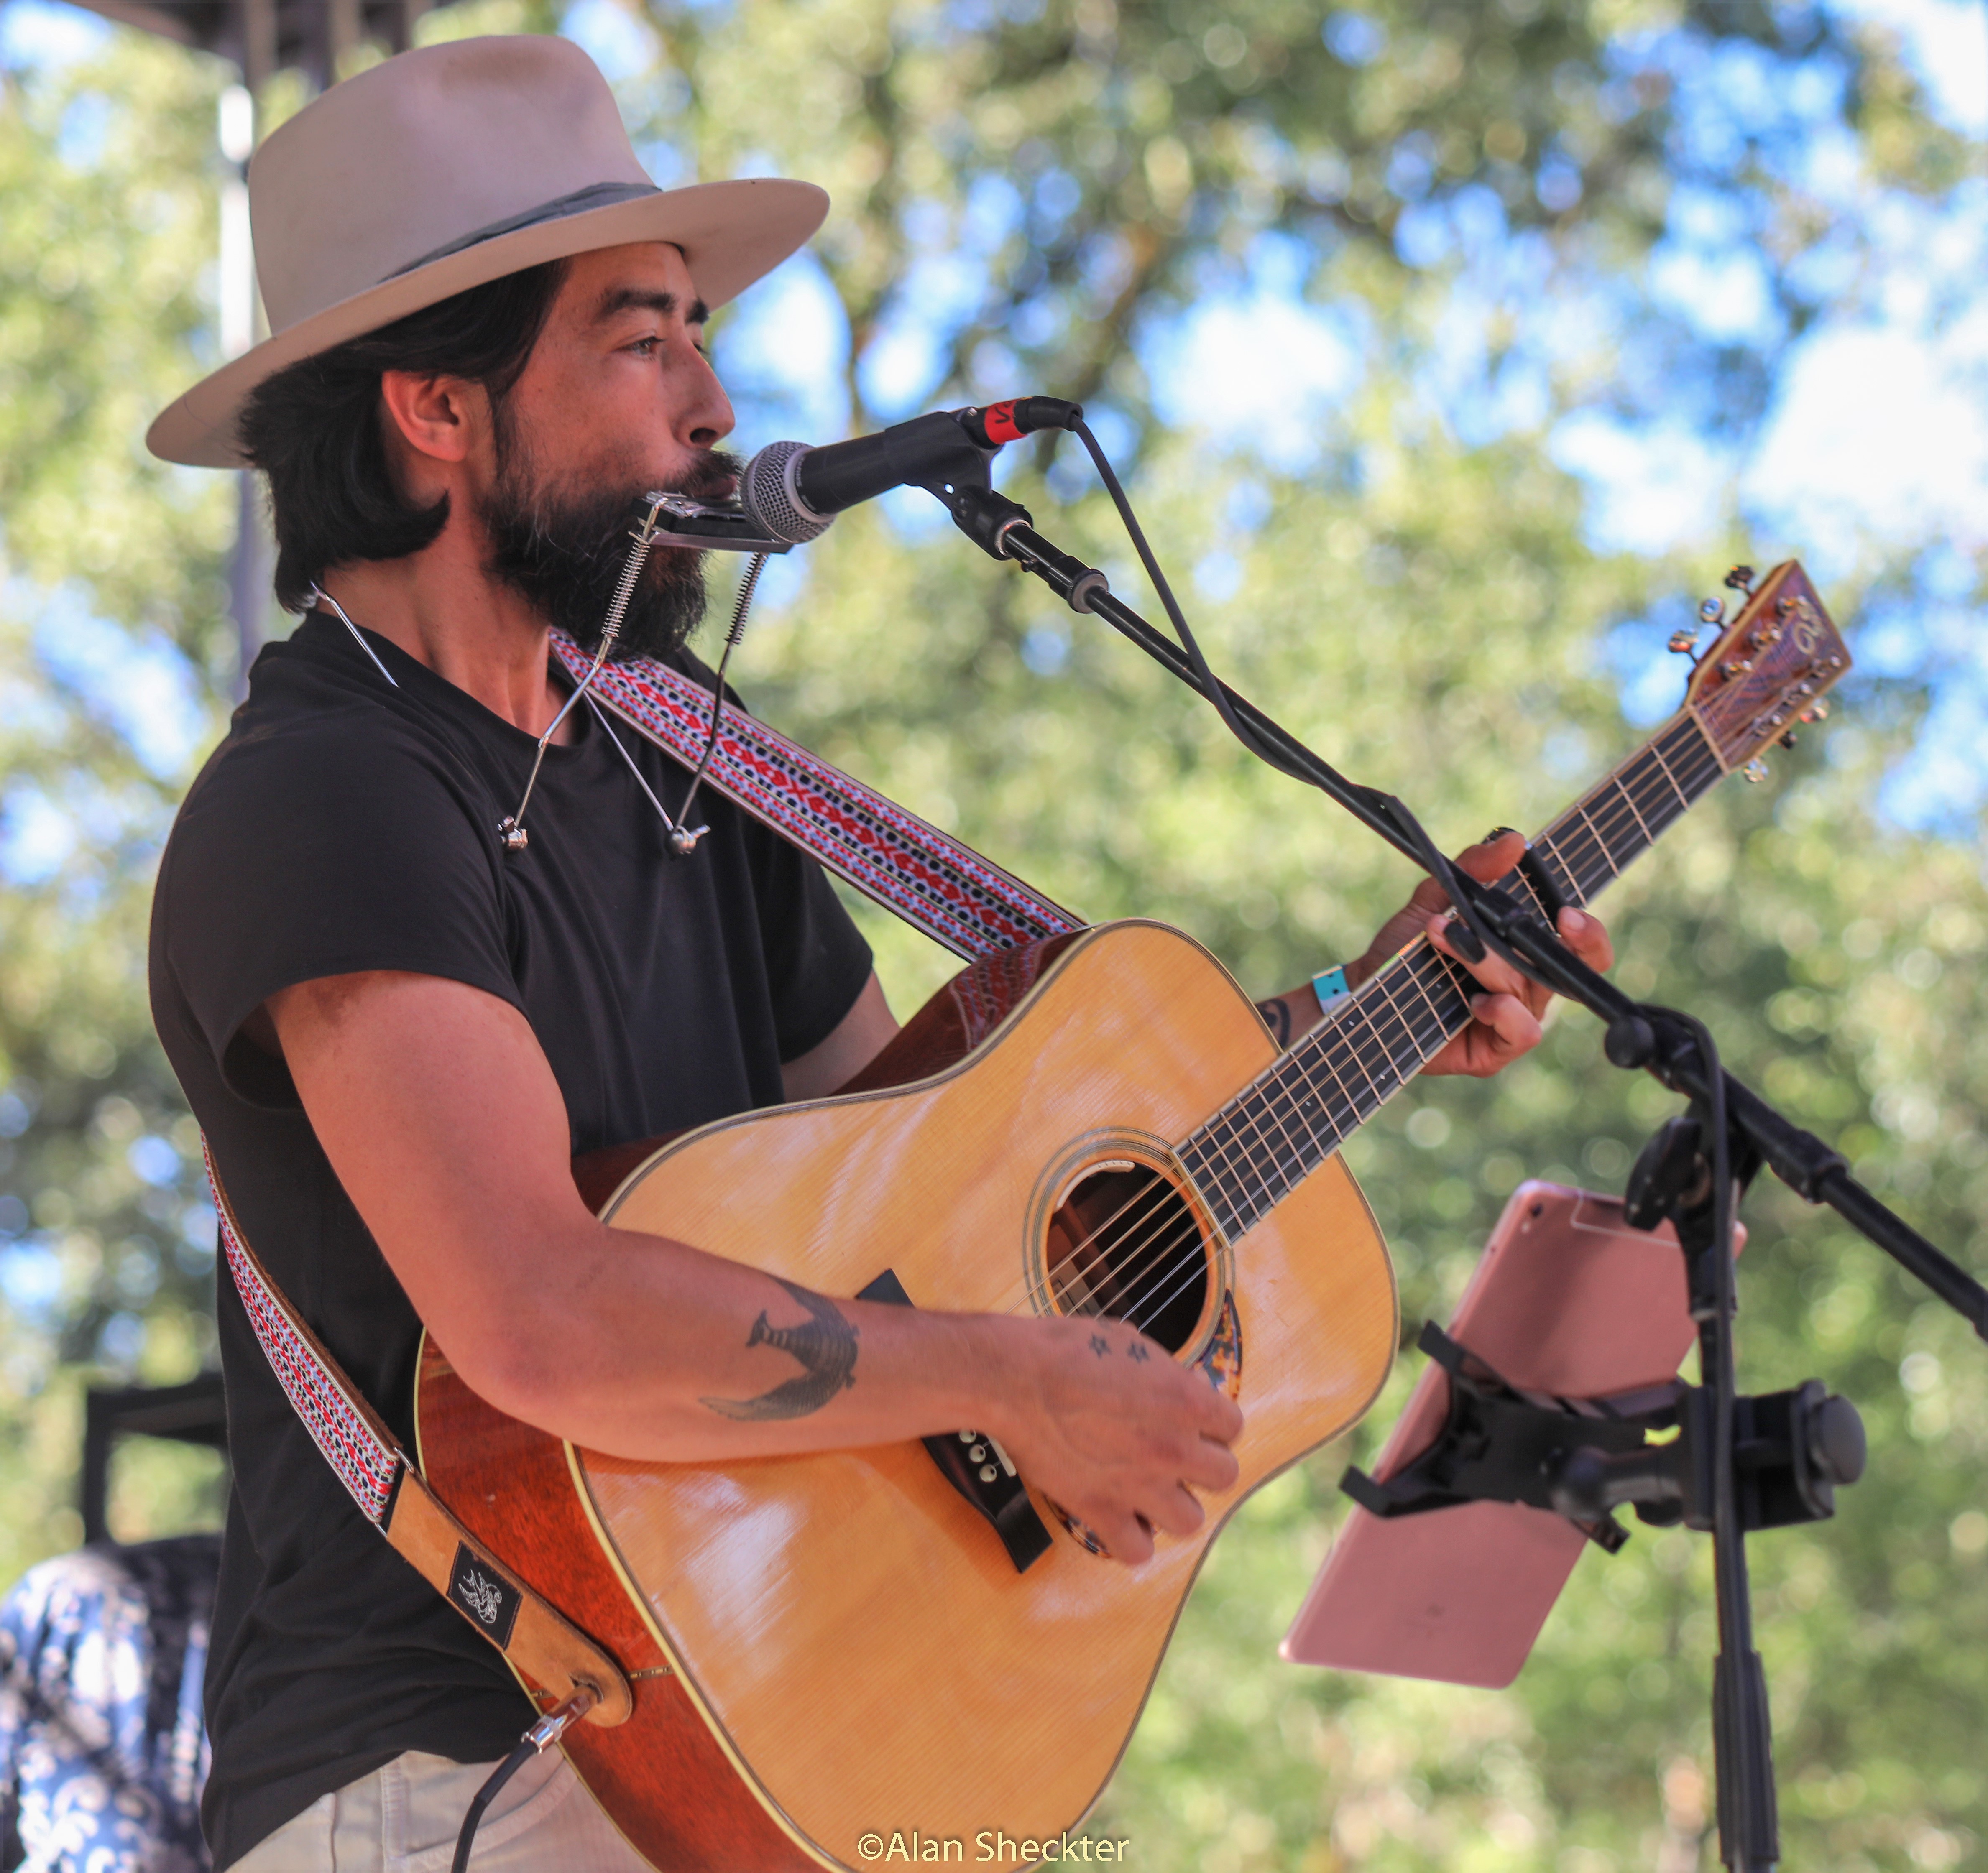 Jackie Greene strums on an acoustic guitar and plays harmonica early in his set on Sunday.